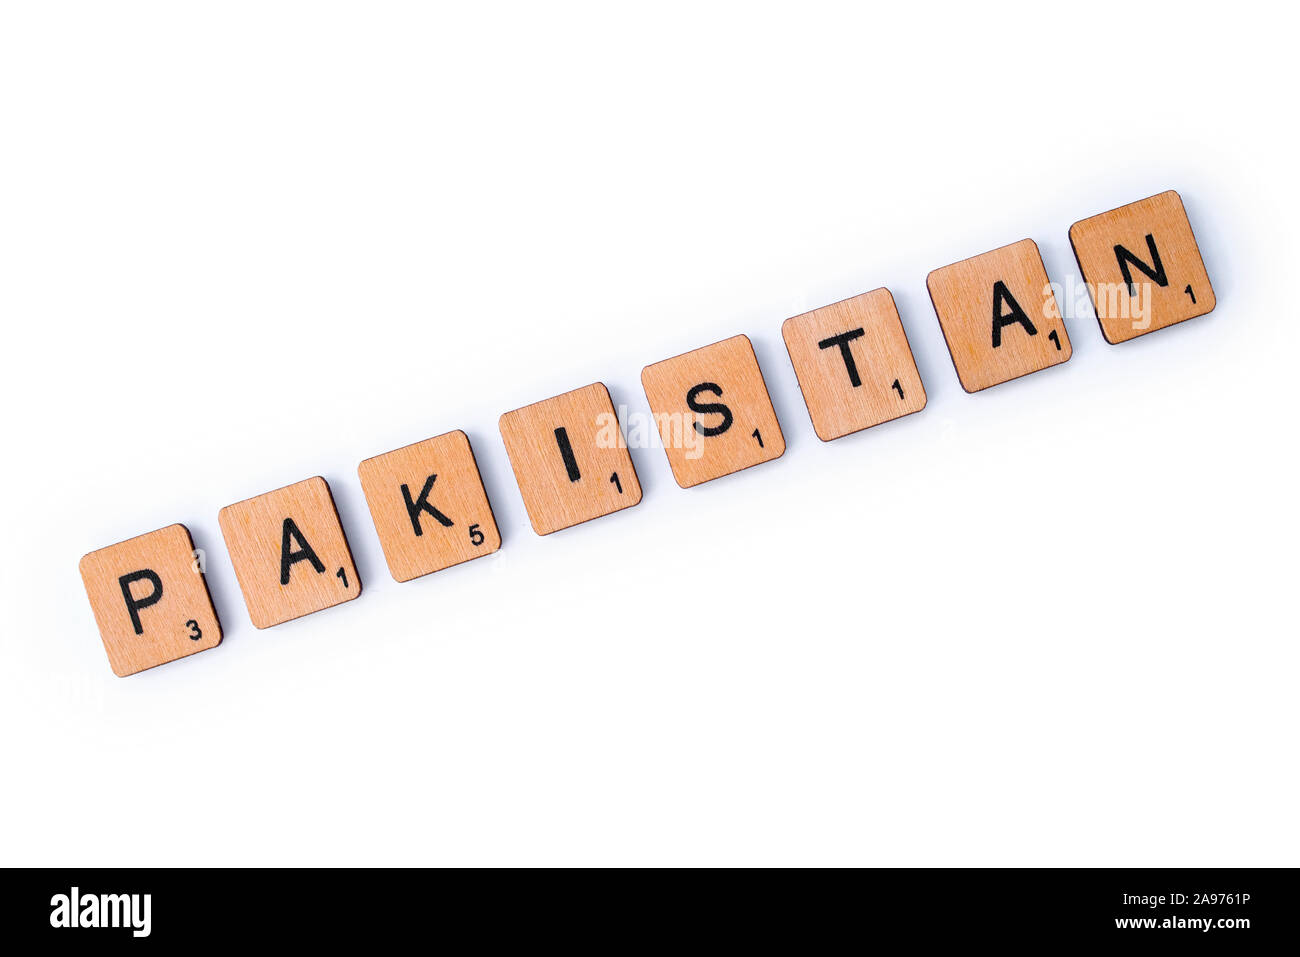 London, UK - July 8th 2019: The word PAKISTAN, spelt with wooden letter tiles over a white background. Stock Photo